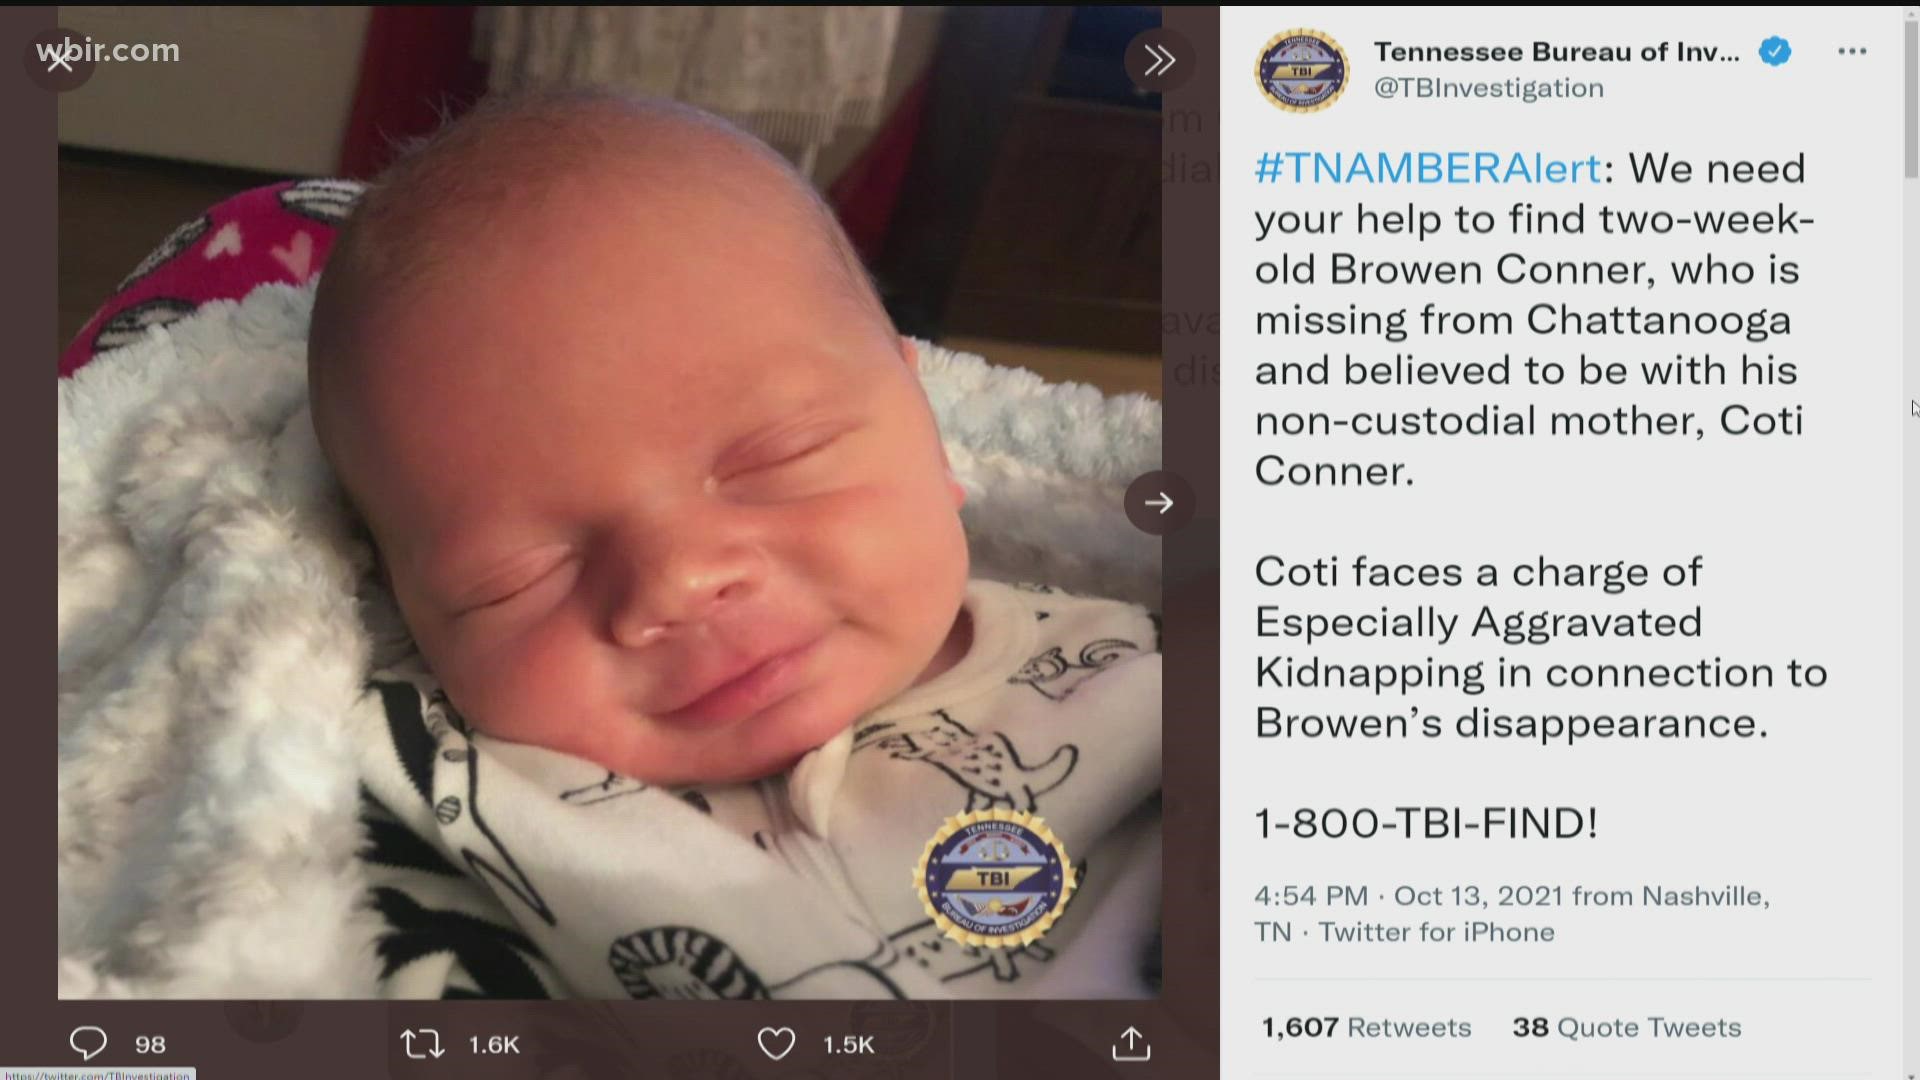 His non-custodial mother, identified as 30-year-old Coti Conner, faces a charge of especially aggravated kidnapping in connection to Browen’s disappearance.